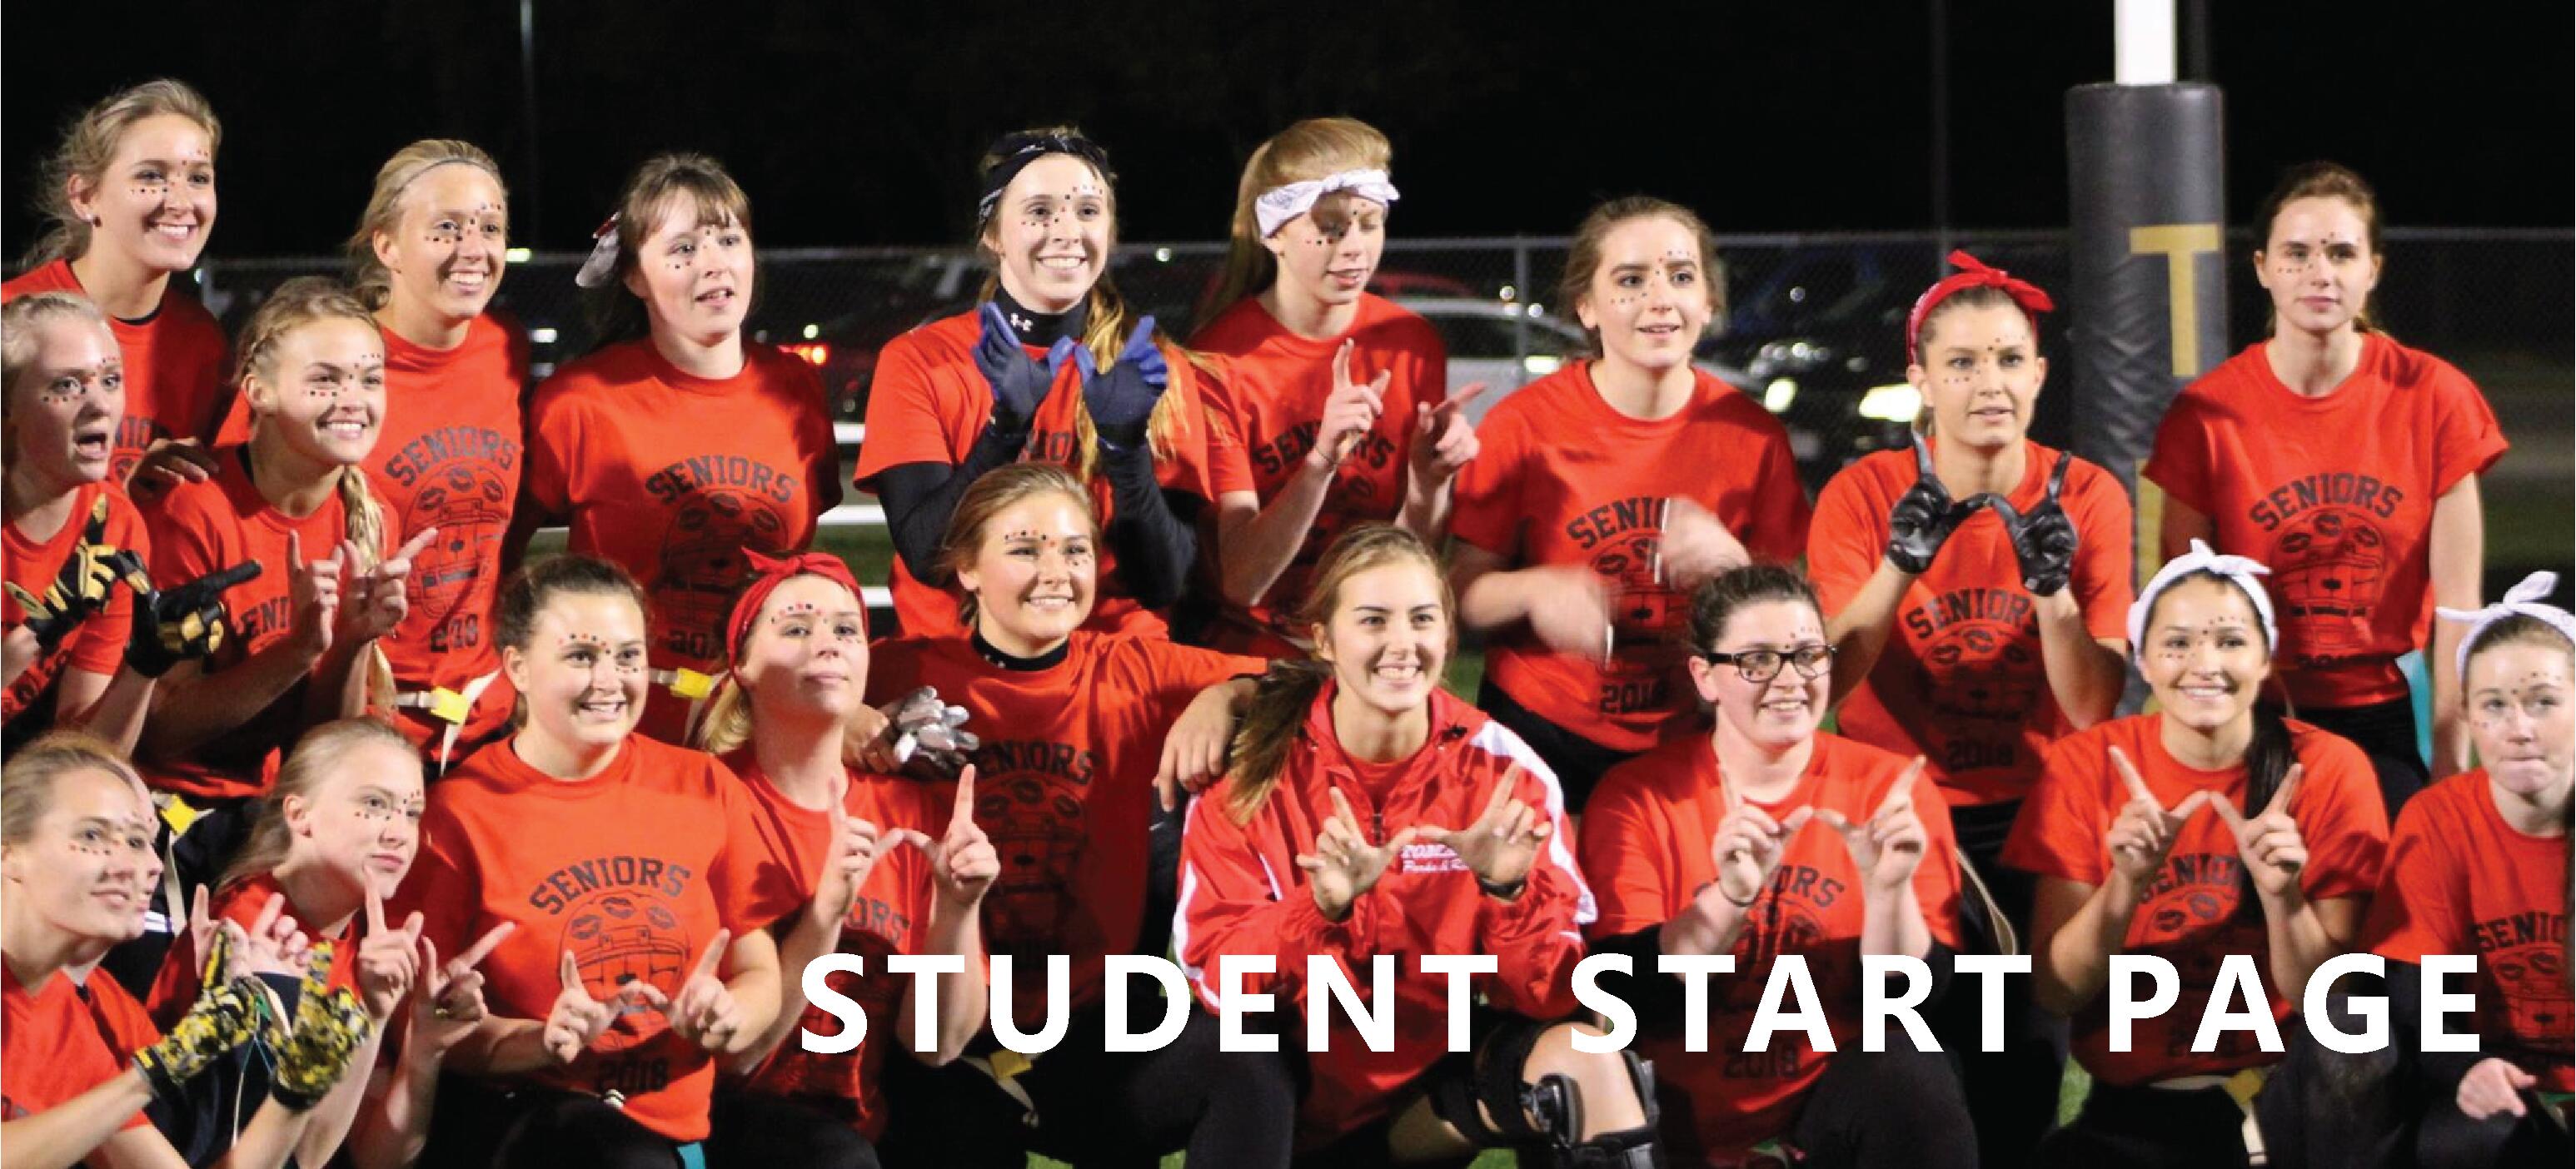 Student Start Page banner